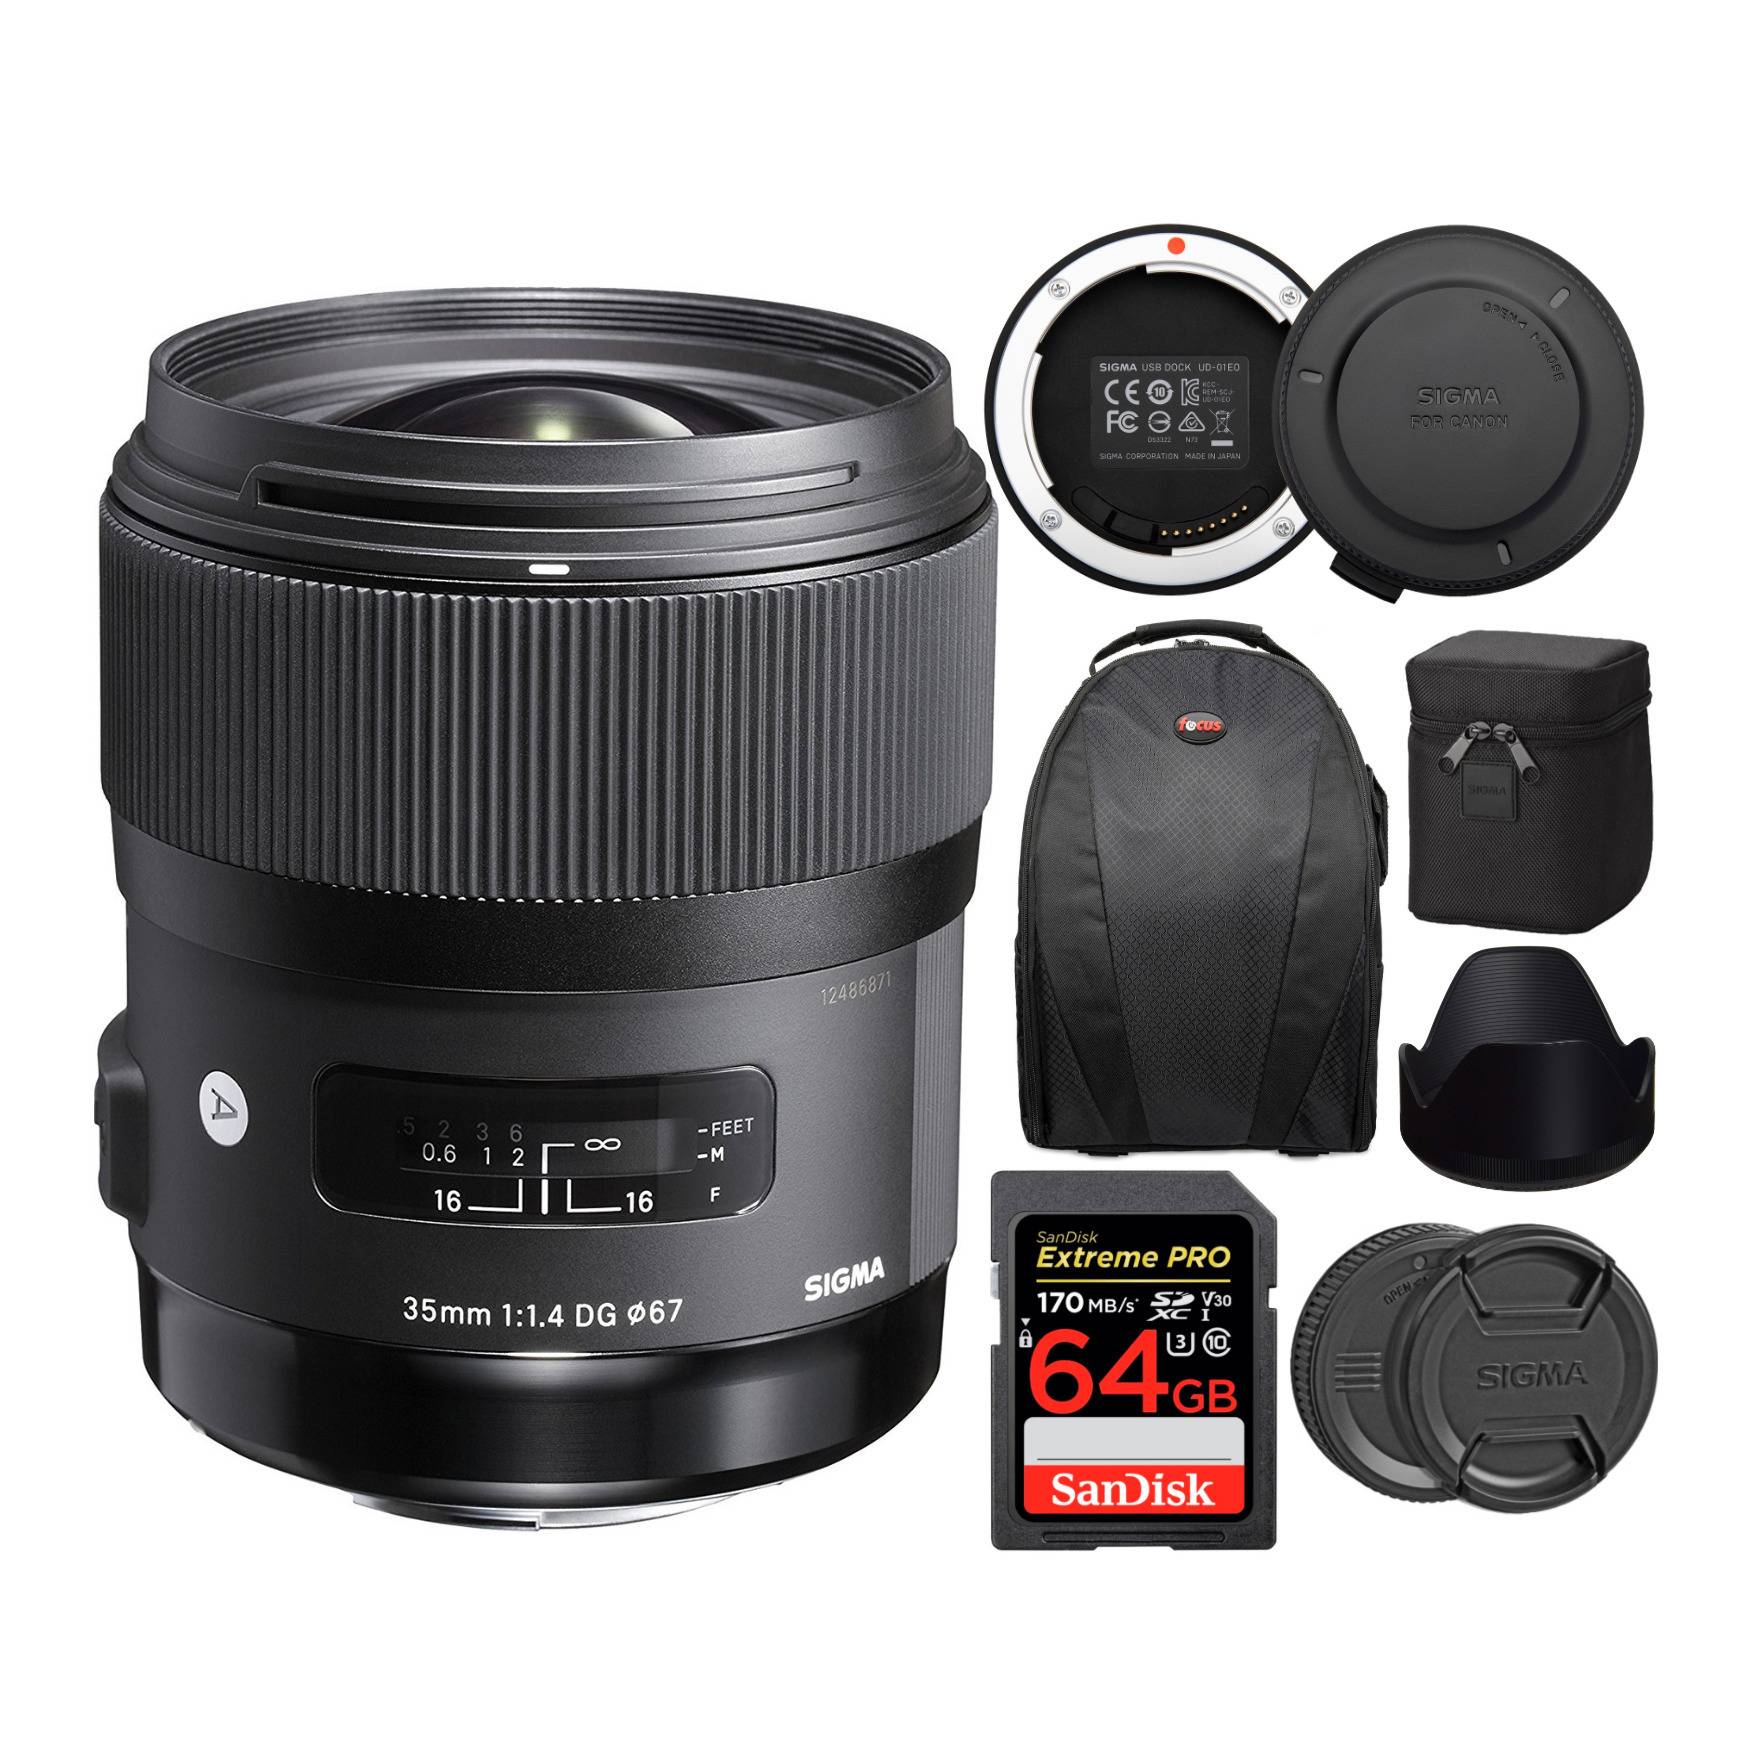 Sigma 35mm f/1.4 DG HSM ART Lens for Canon EF with USB Dock AND 64GB Extreme PRO SD Card Bundle